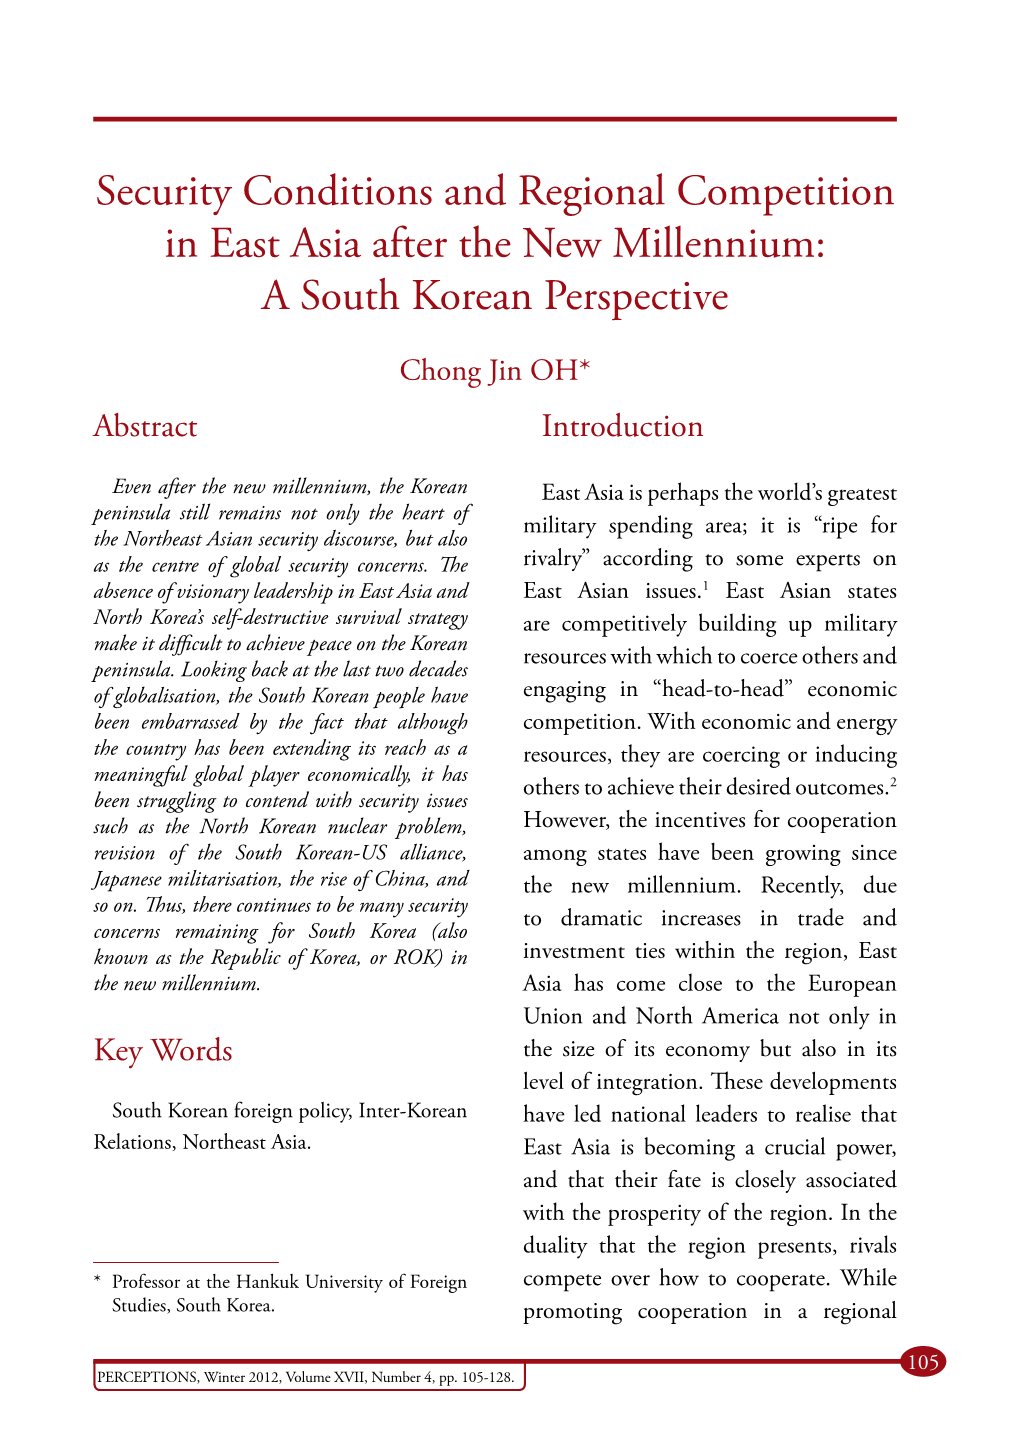 Security Conditions and Regional Competition in East Asia After the New Millennium: a South Korean Perspective